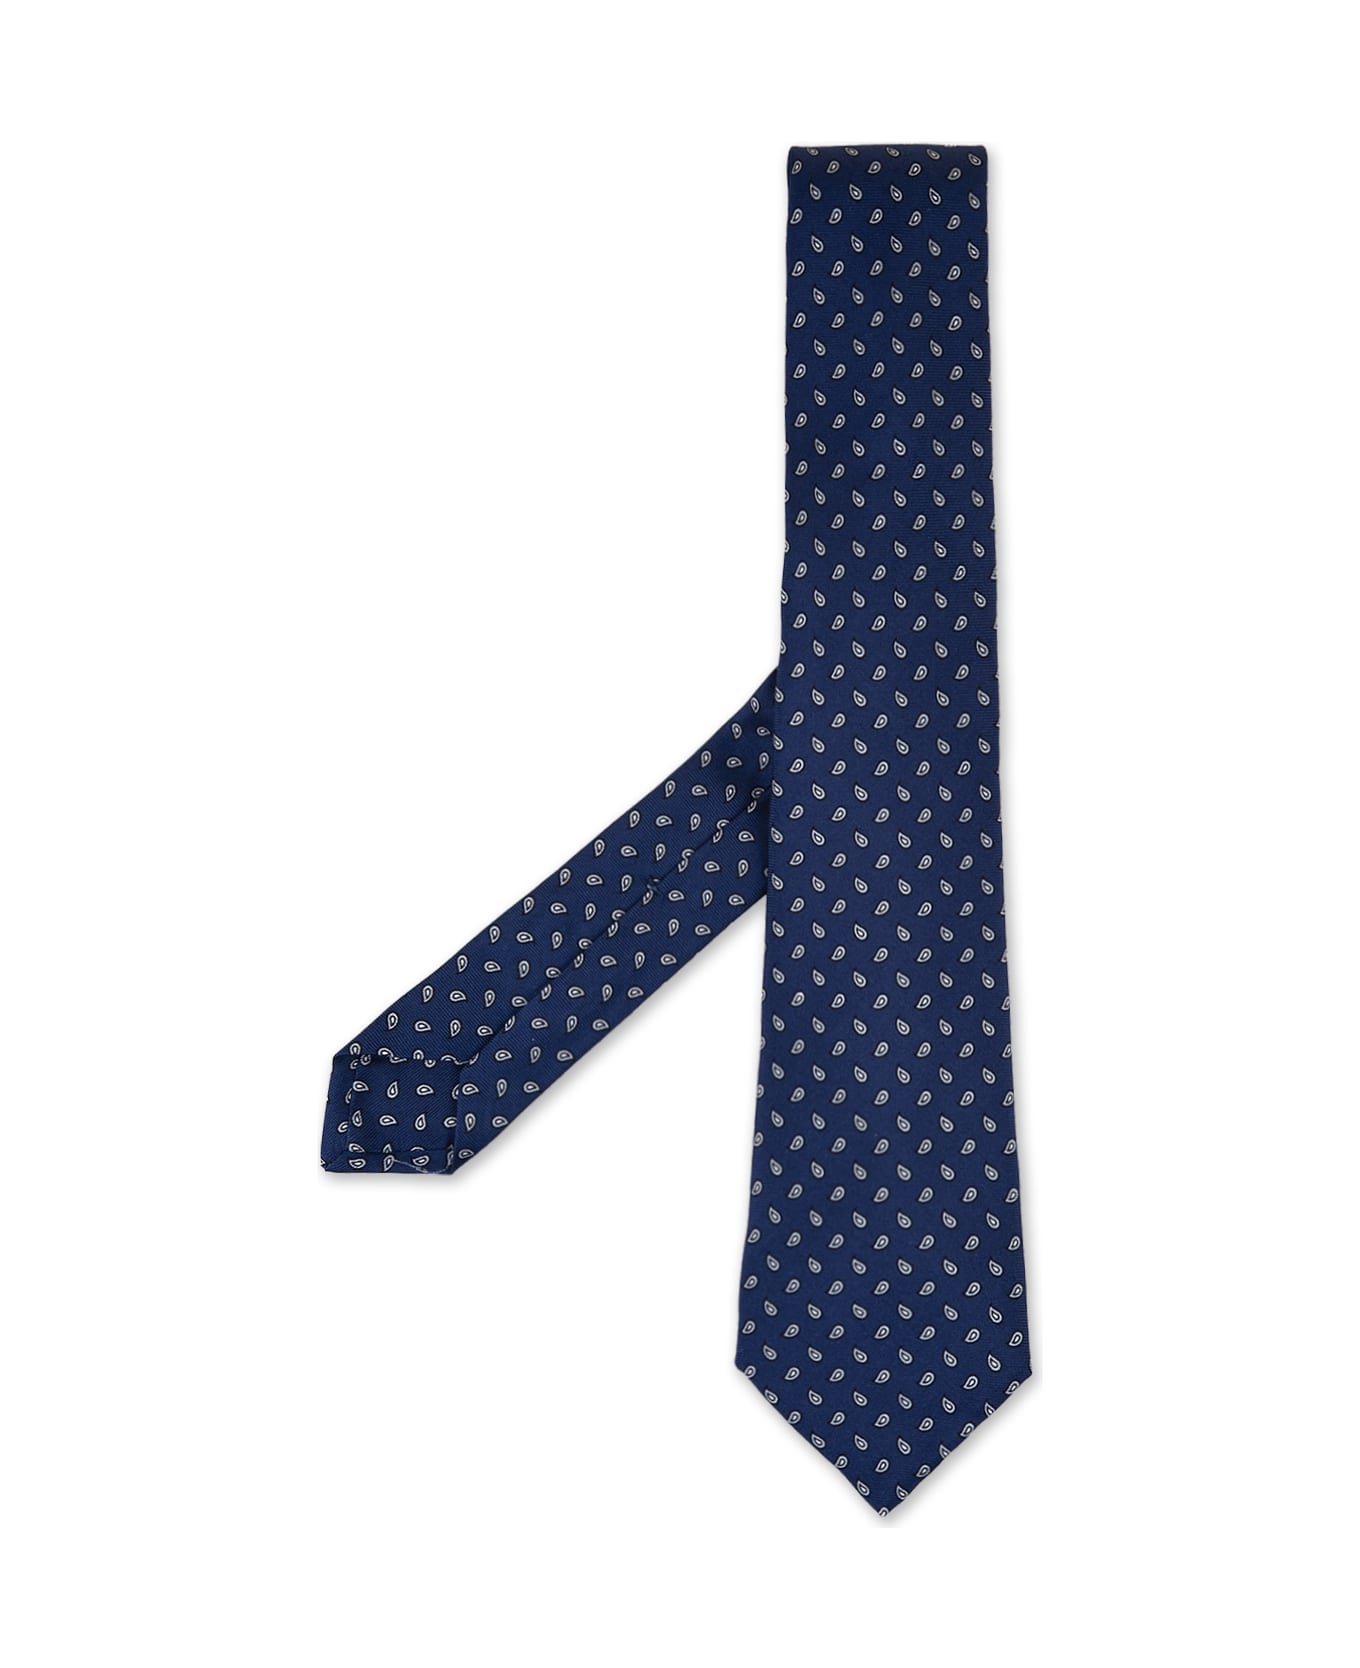 Kiton Blue Tie With Drops Pattern - Blue ネクタイ